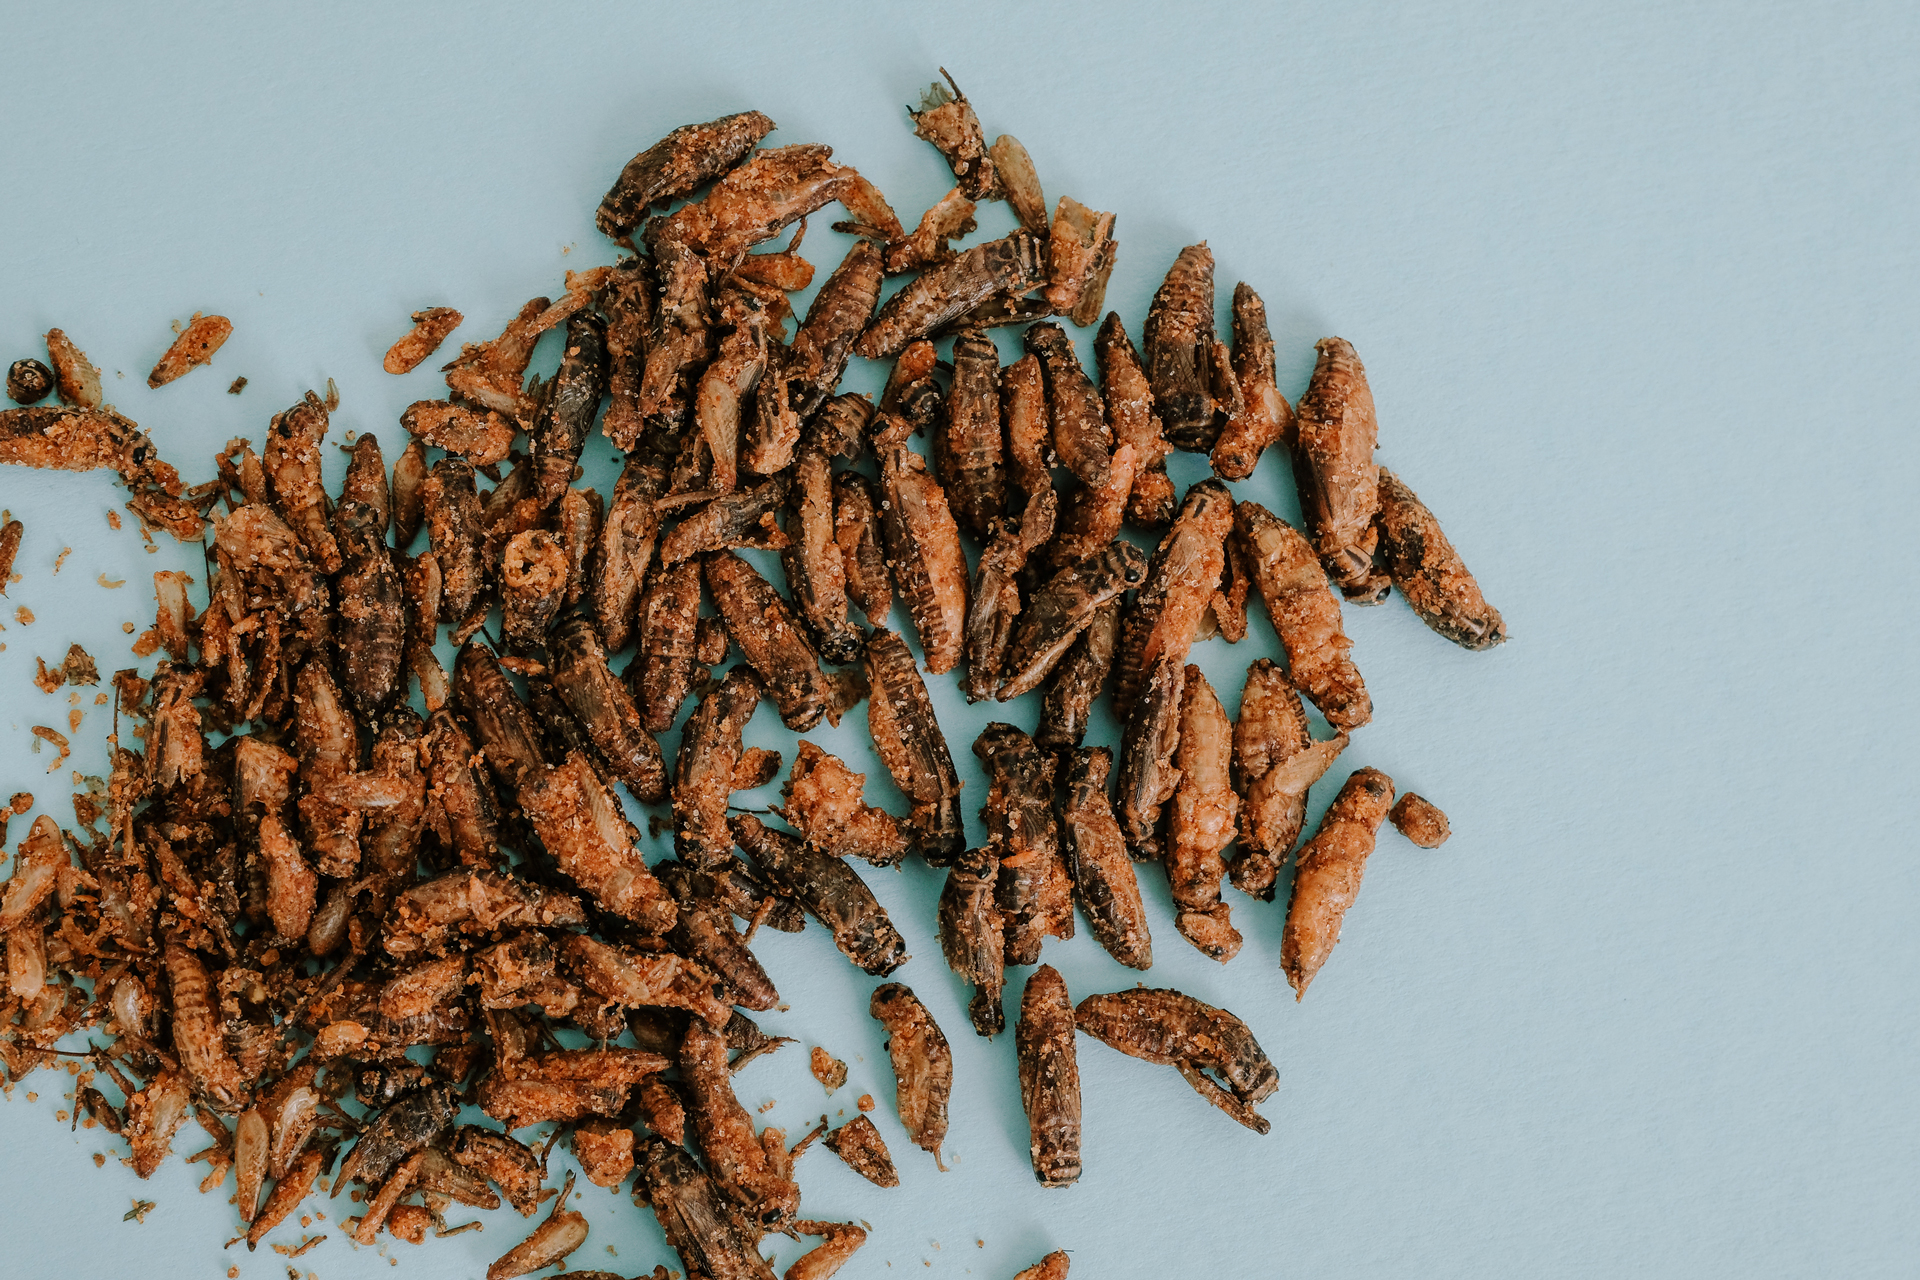 Eat Grub's Neil Whippey: 'Changing people's perceptions of insects